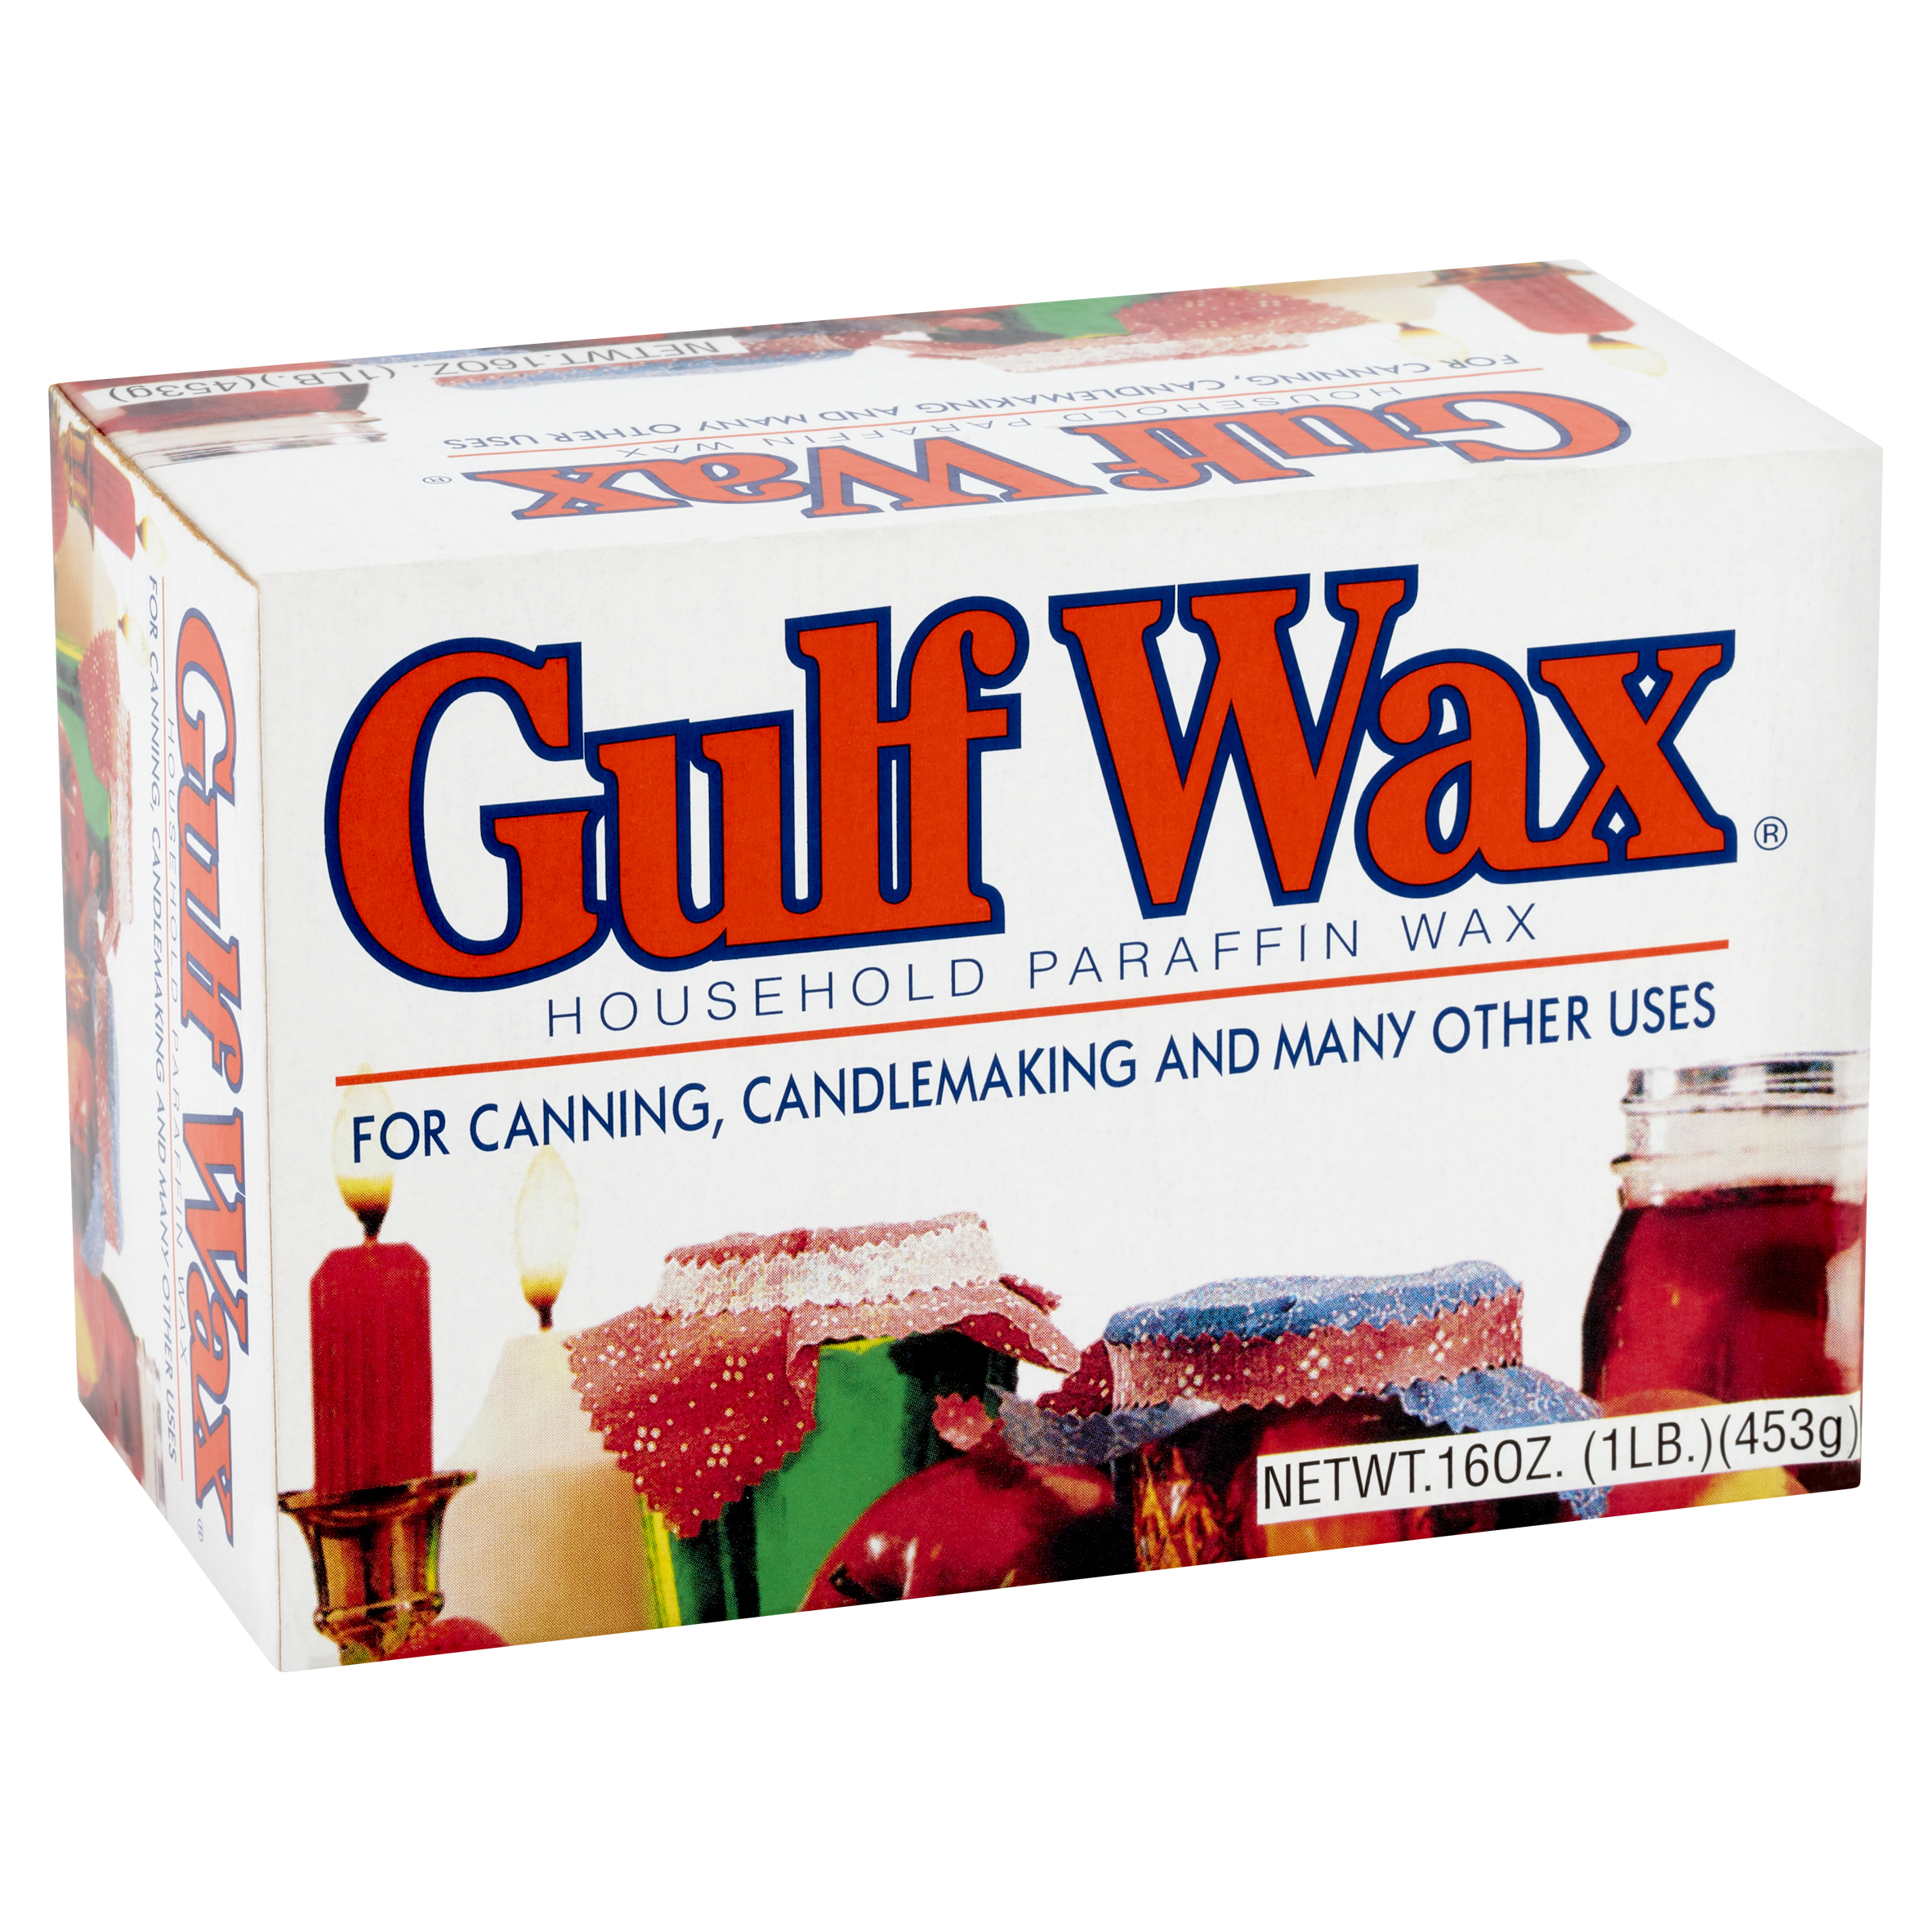 Paraffin Wax - Wholesale - Semsey Skincare Solution